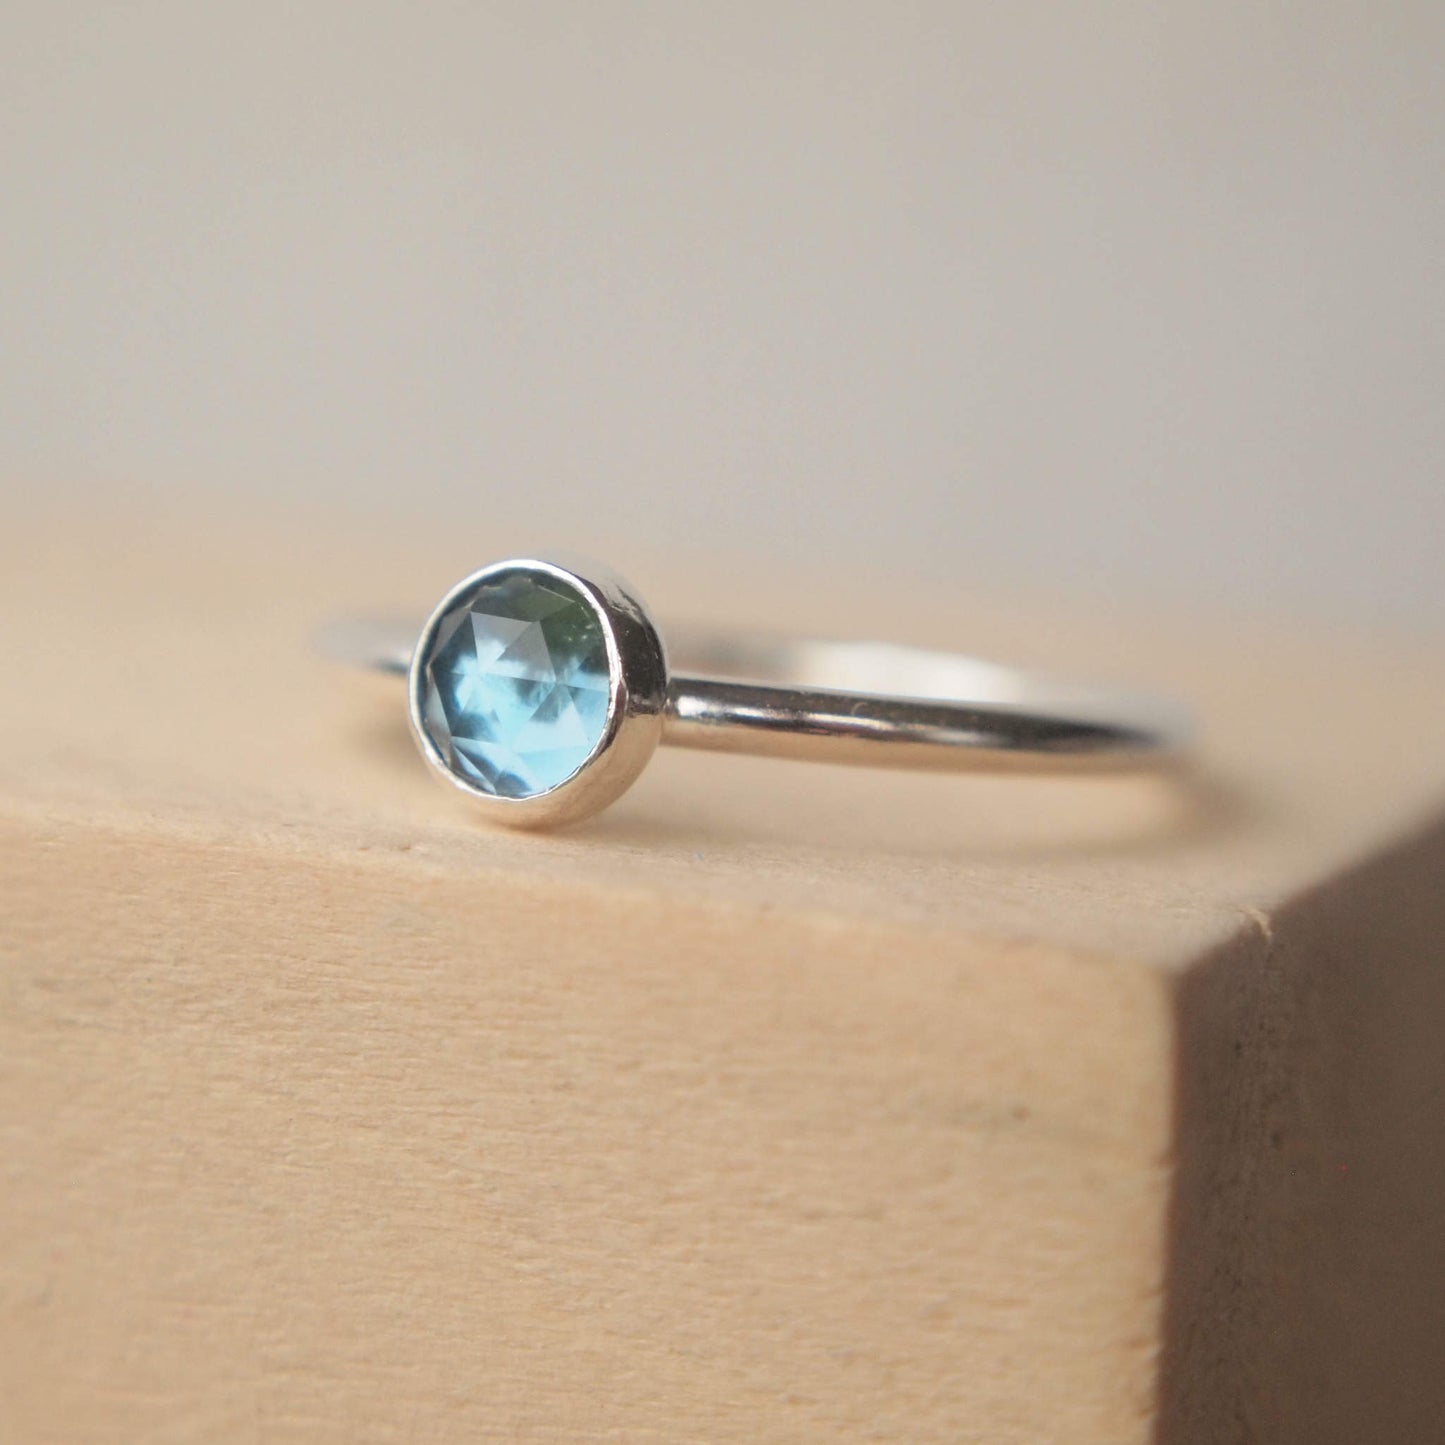 London Blue Topaz Sterling Silver Gemstone ring with a round 5mm facet cut teal Blue cabochon. Handmade in Scotland by maram jewellery